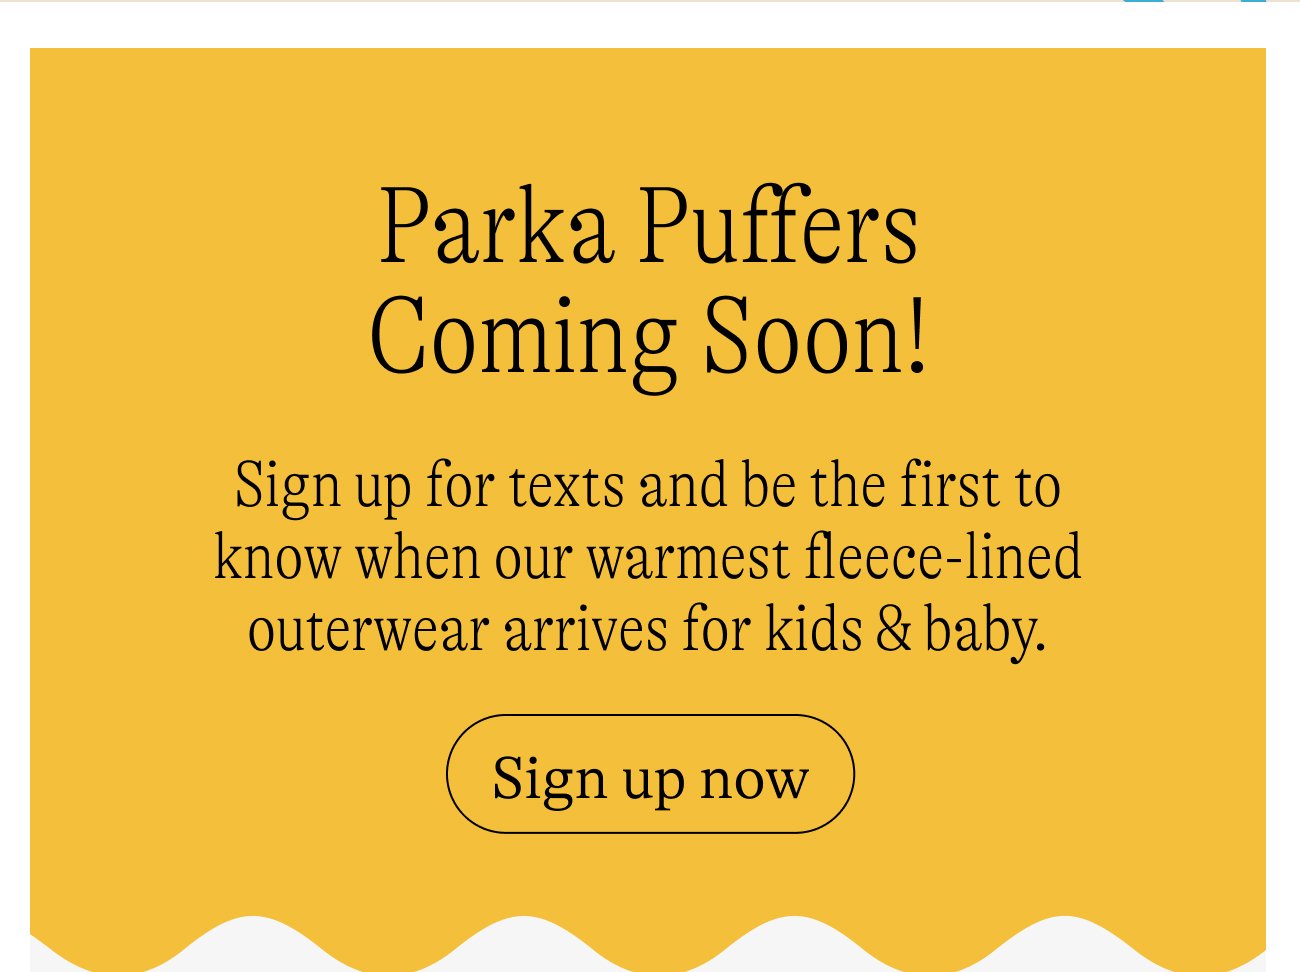 Parka Puffers Coming Soon! Sign up for texts and be the first to know when our warmest fleece-lined outerwear arrives for kids & baby. Sign up now.